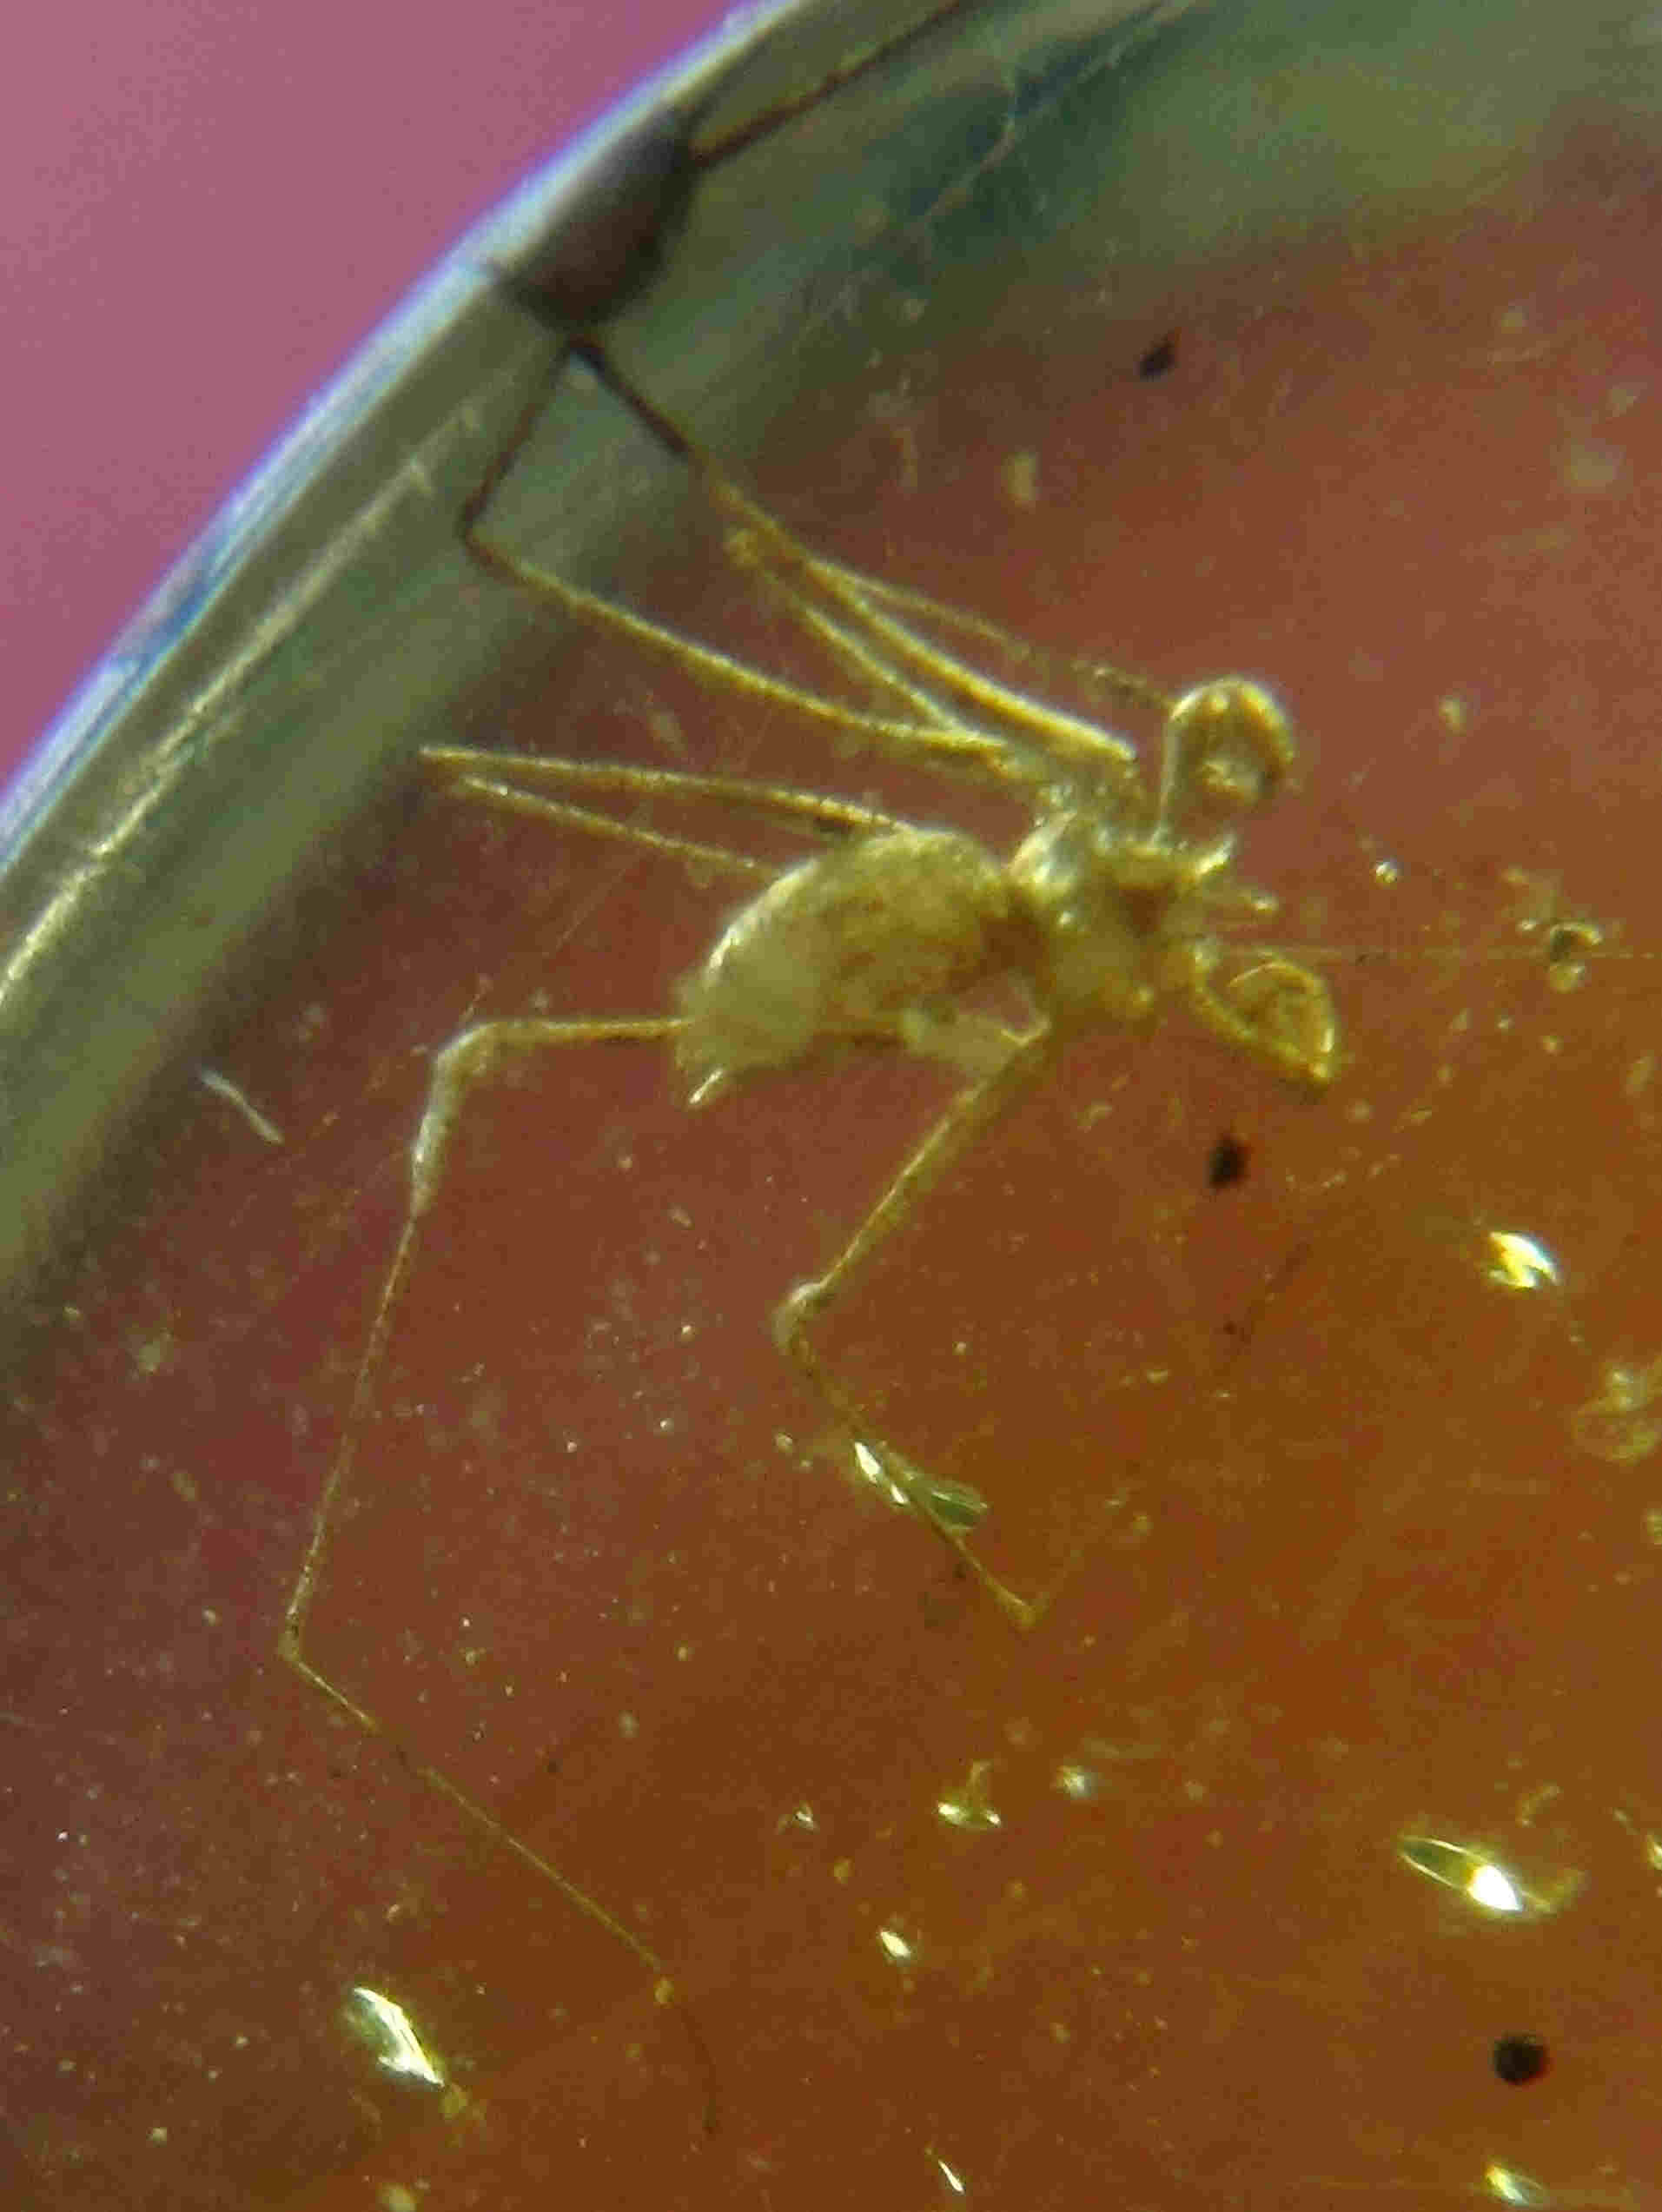 Spider whiptail scorpion in amber